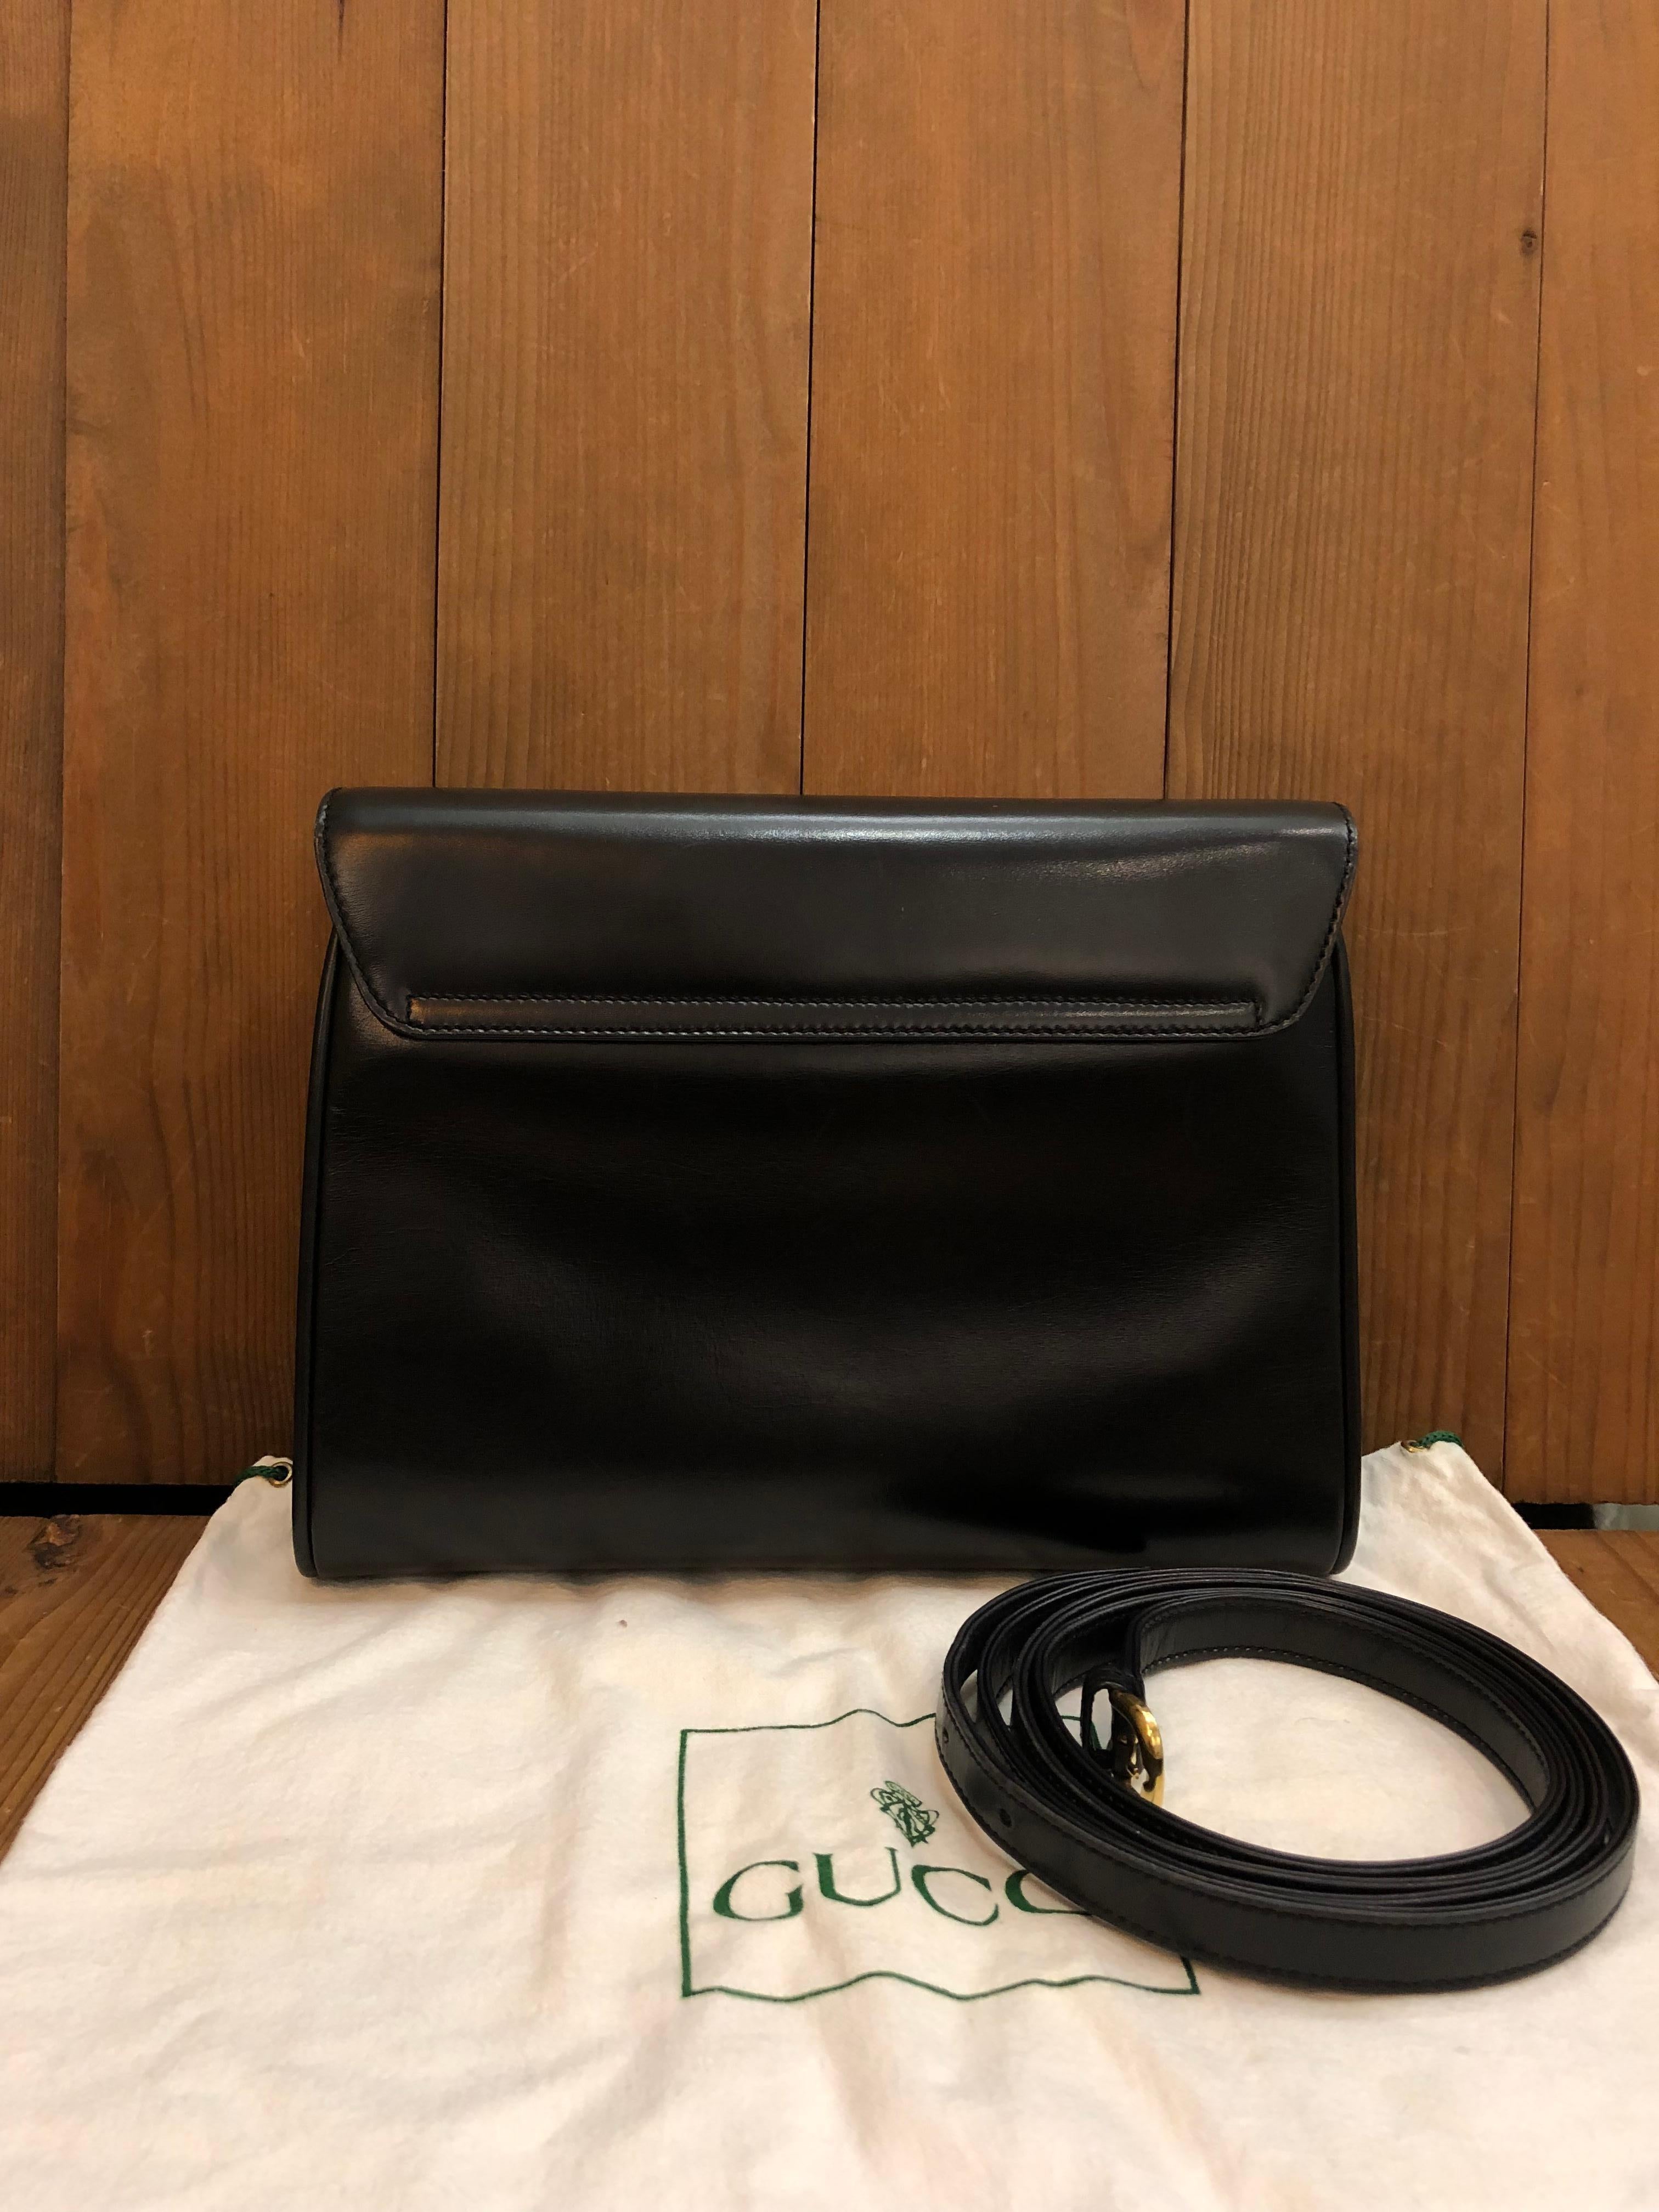 This vintage GUCCI two-way clutch/crossbody bag is crafted of smooth calfskin leather in black featuring gold toned hardware. Gucci Crest magnetic snap closure opens to a black suede interior featuring a zippered pocket. This vintage Gucci also